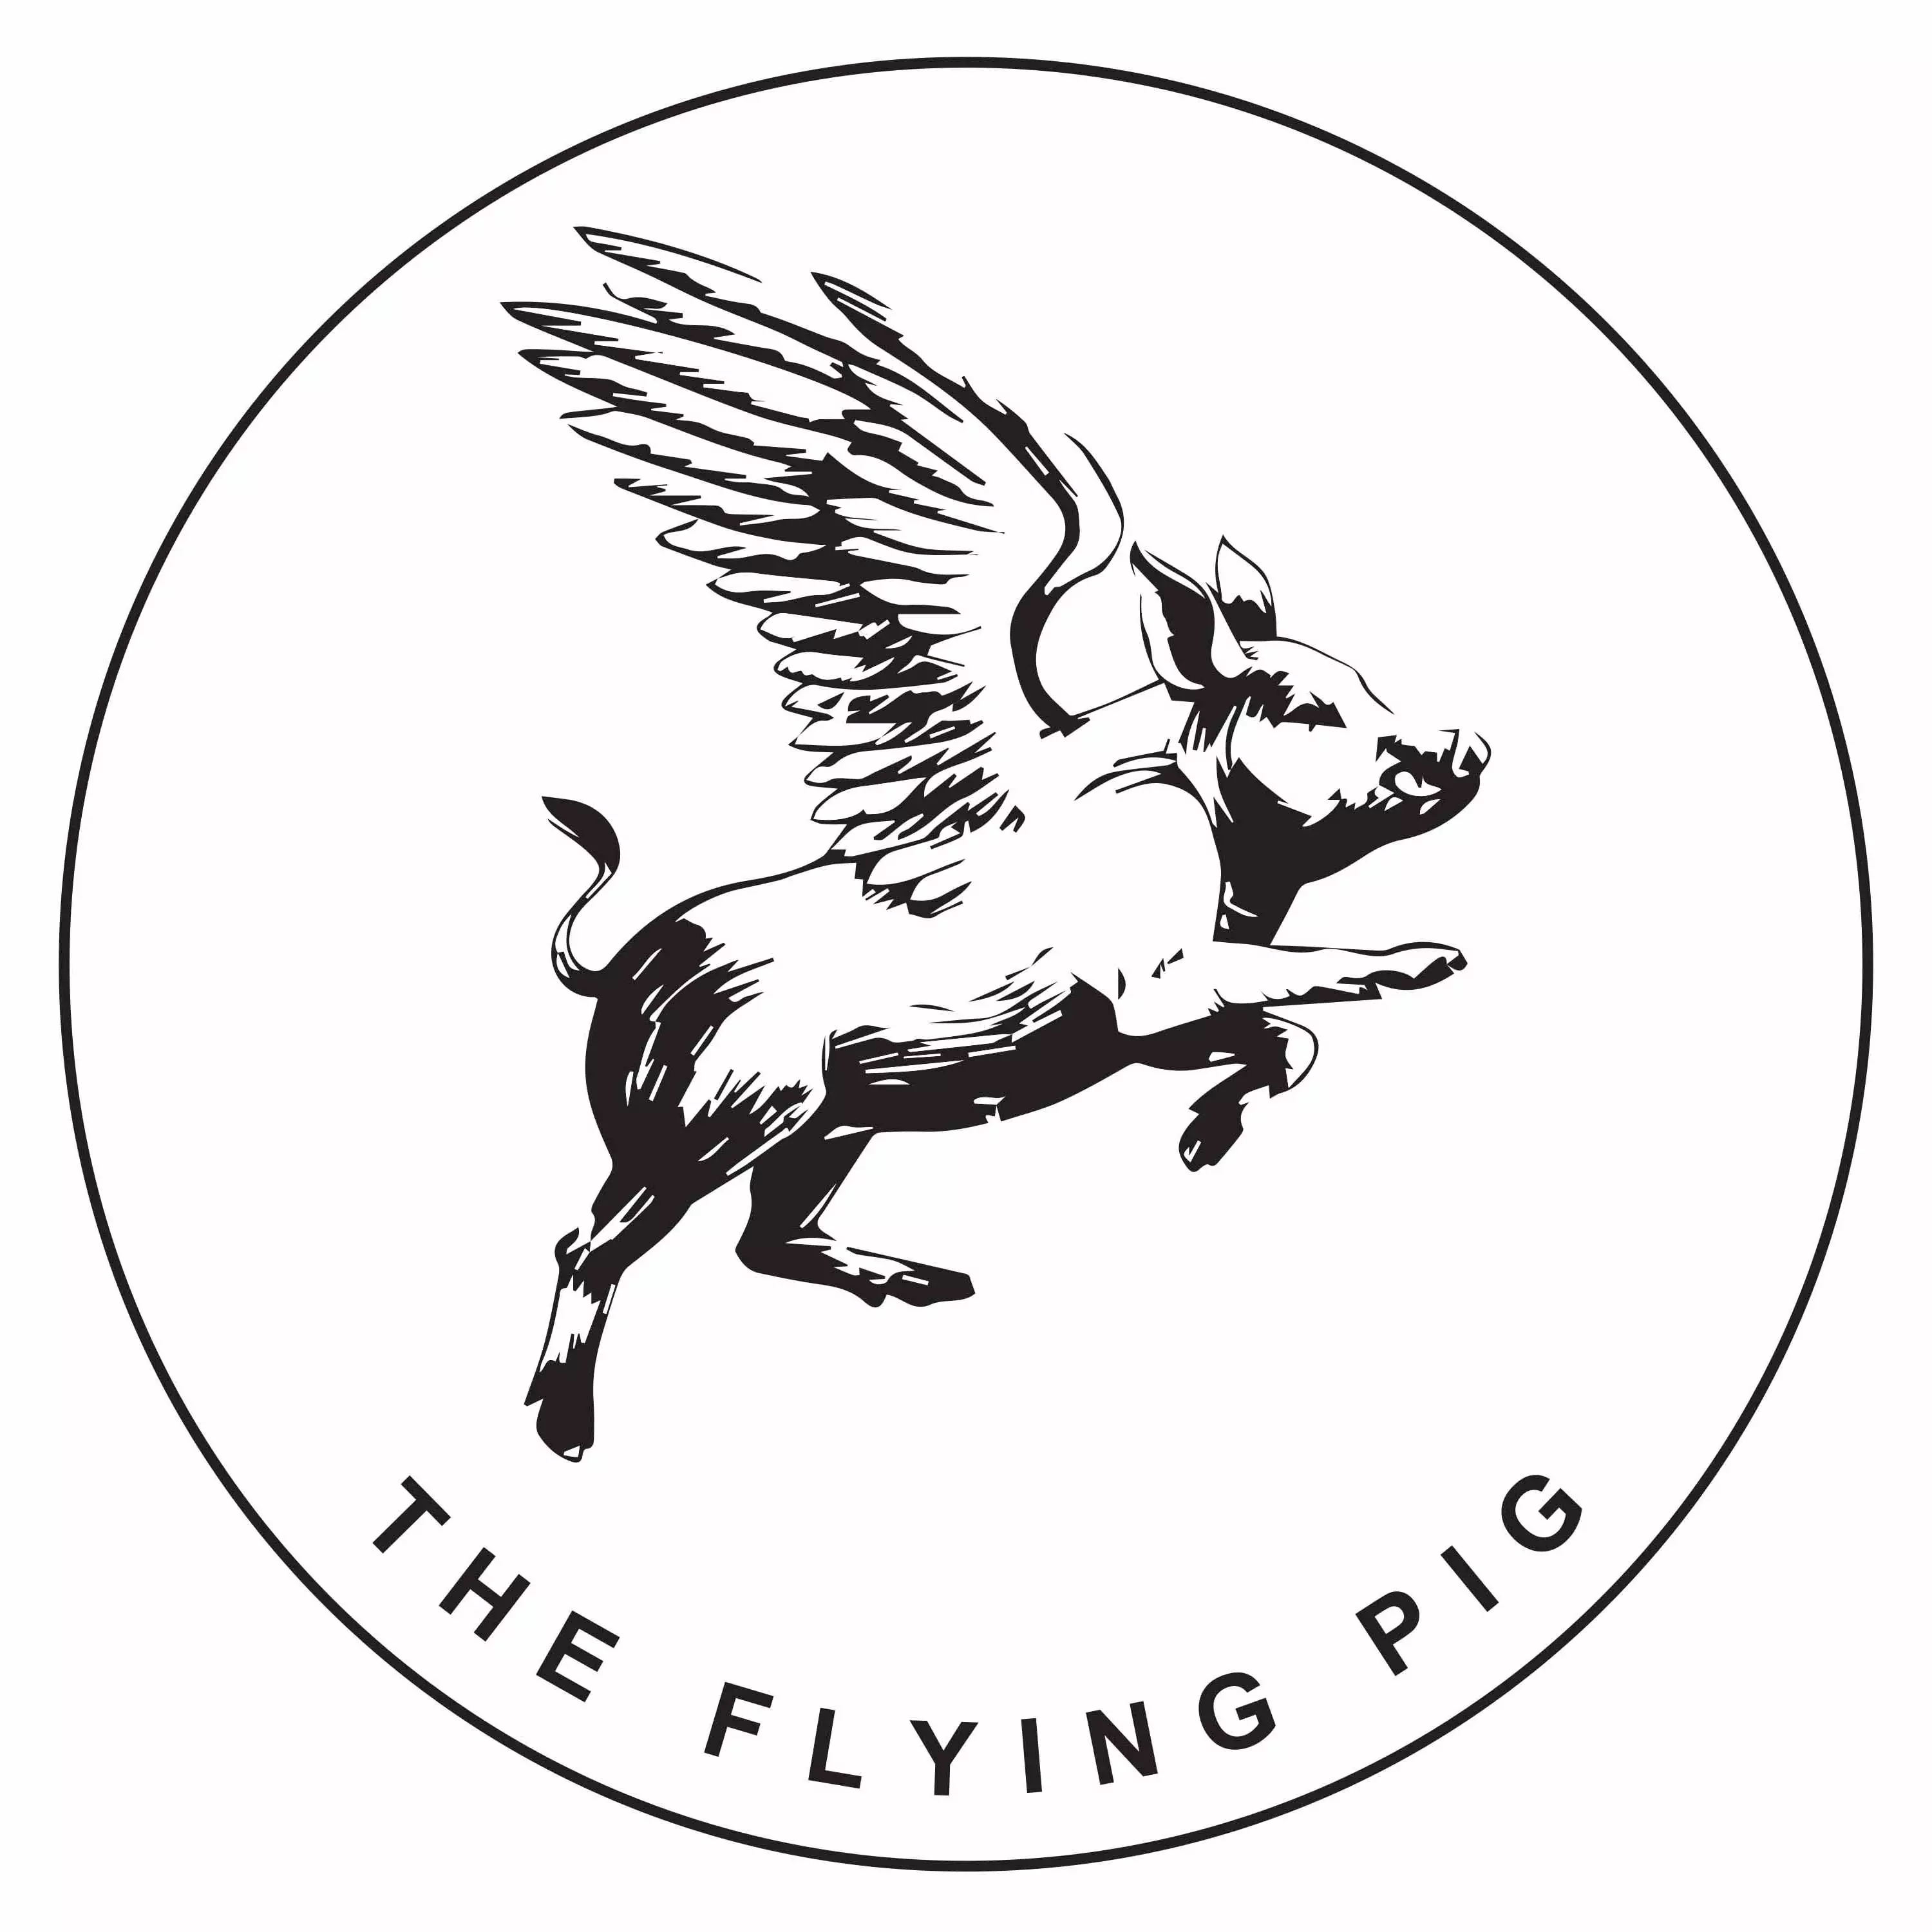  The Flying Pig 